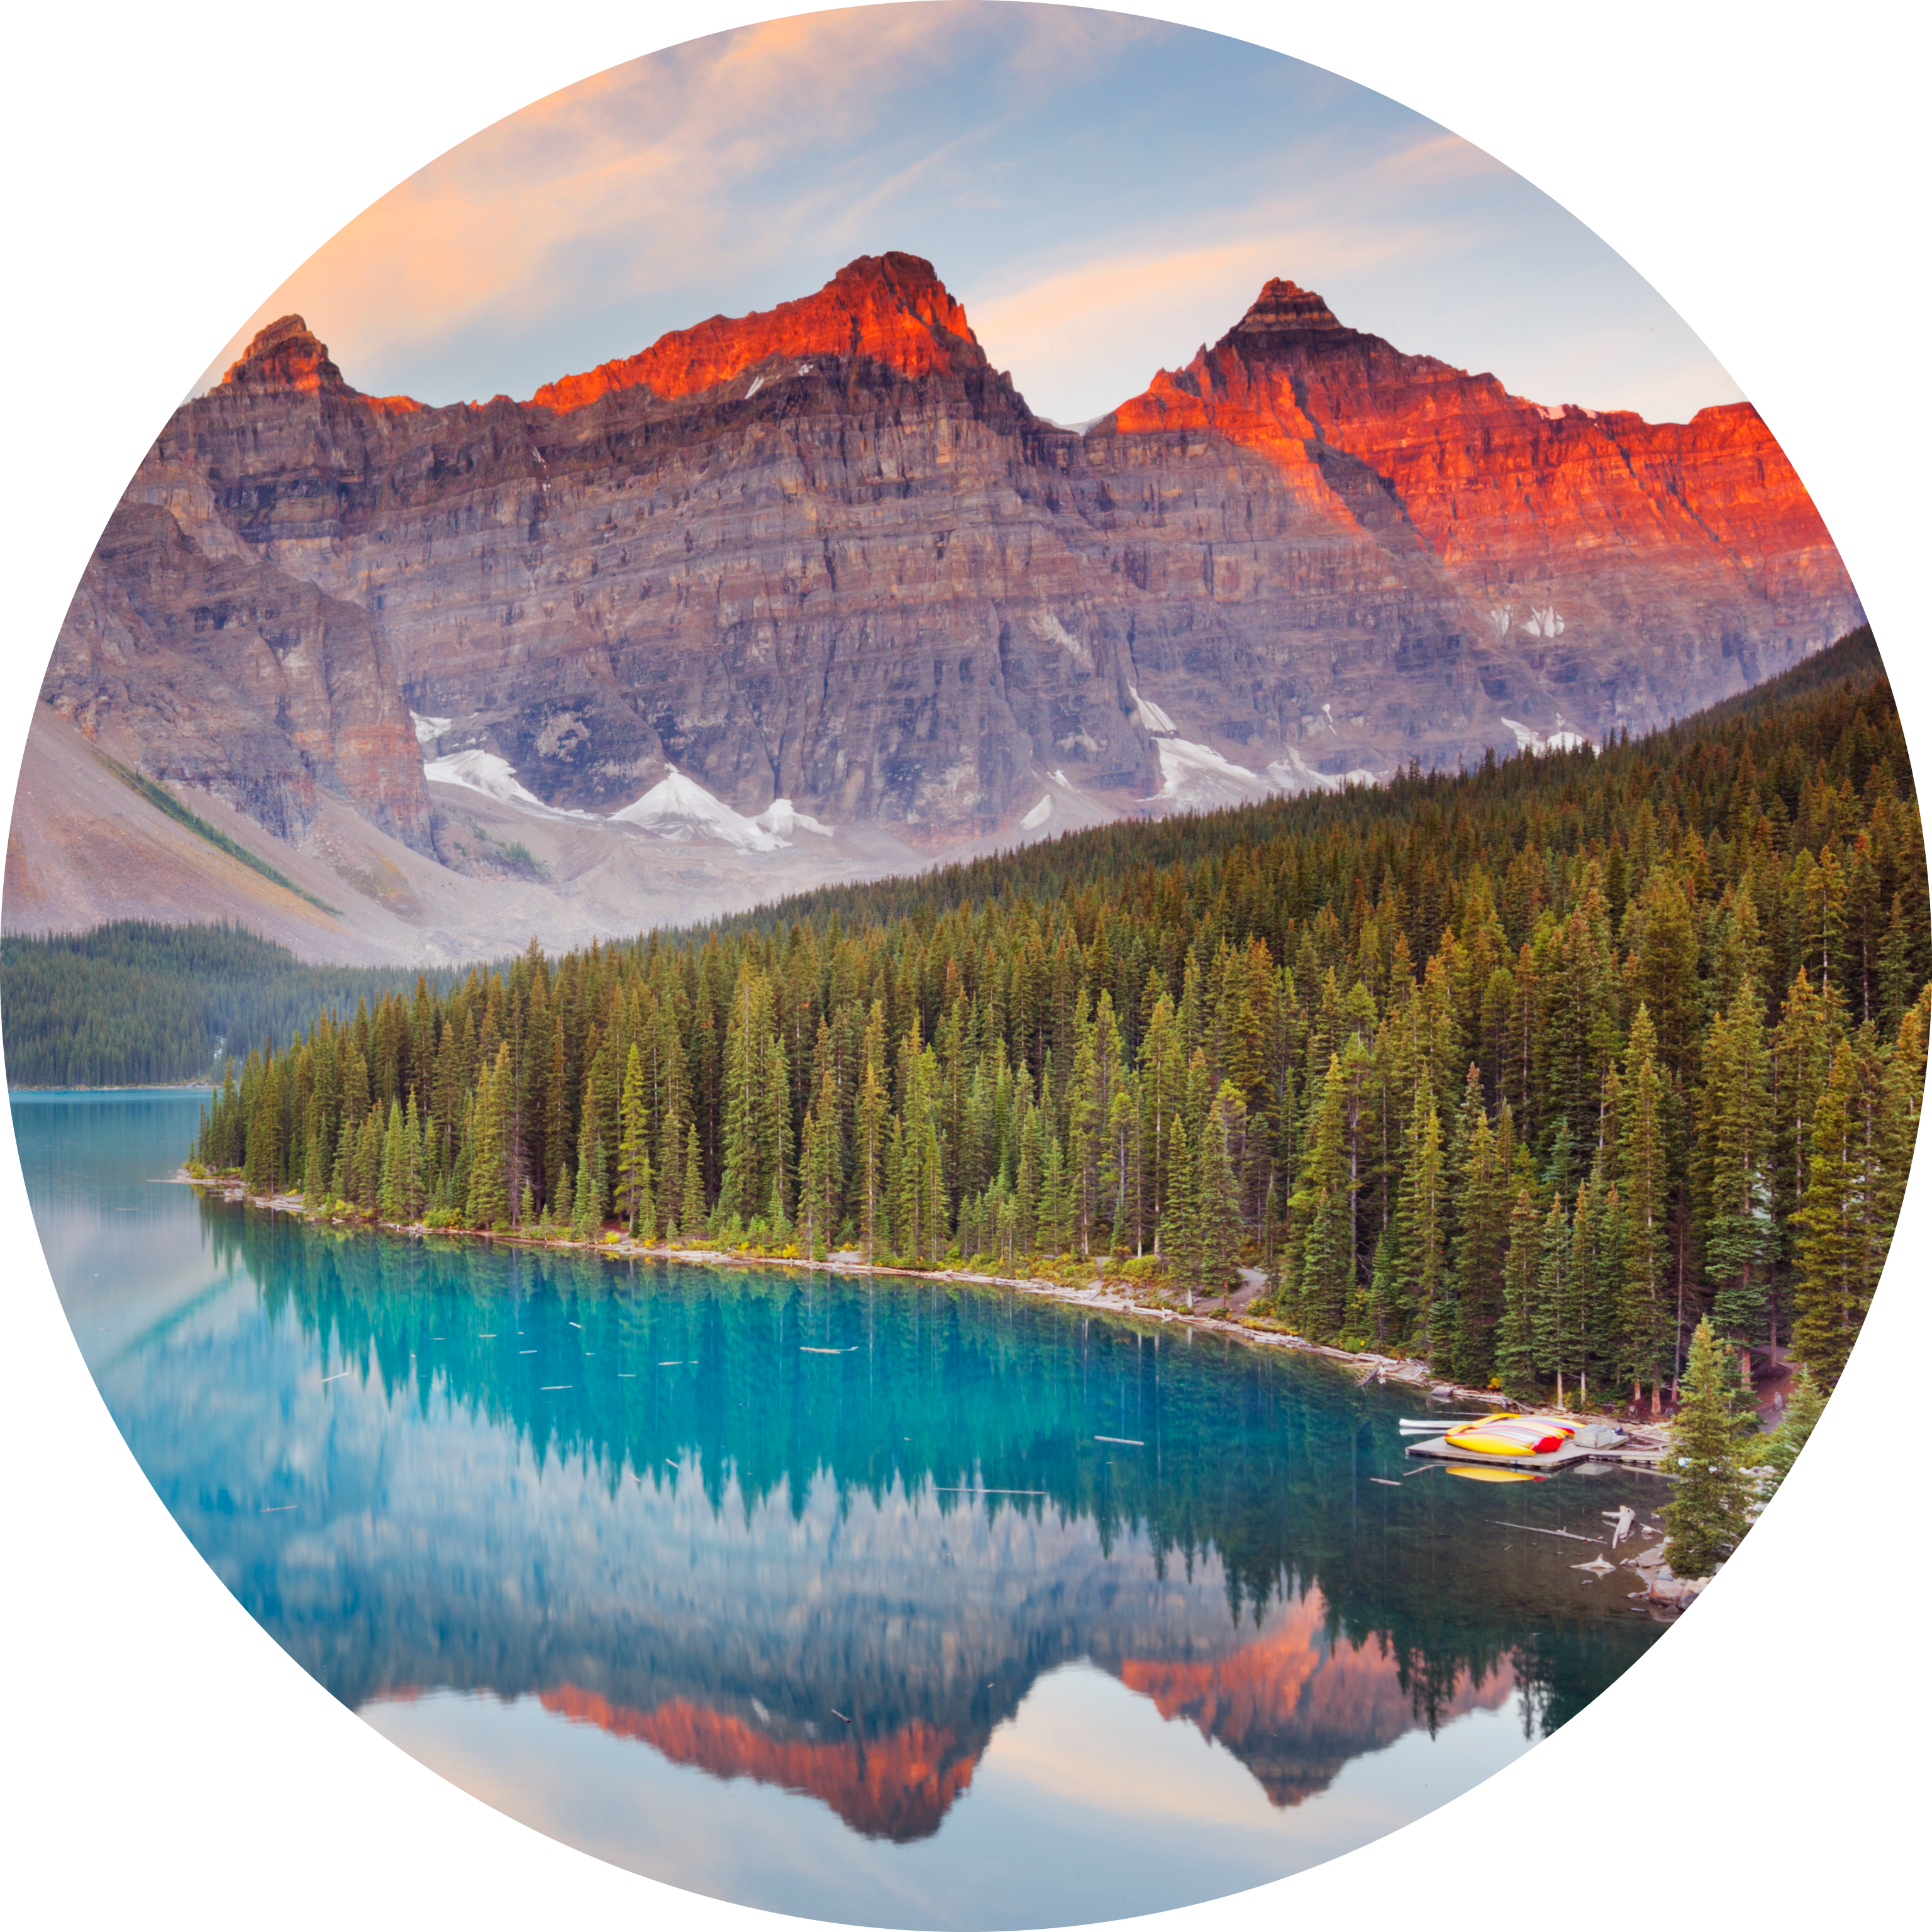 Get Travelex travel insurance to see Banff National Park in Canada.